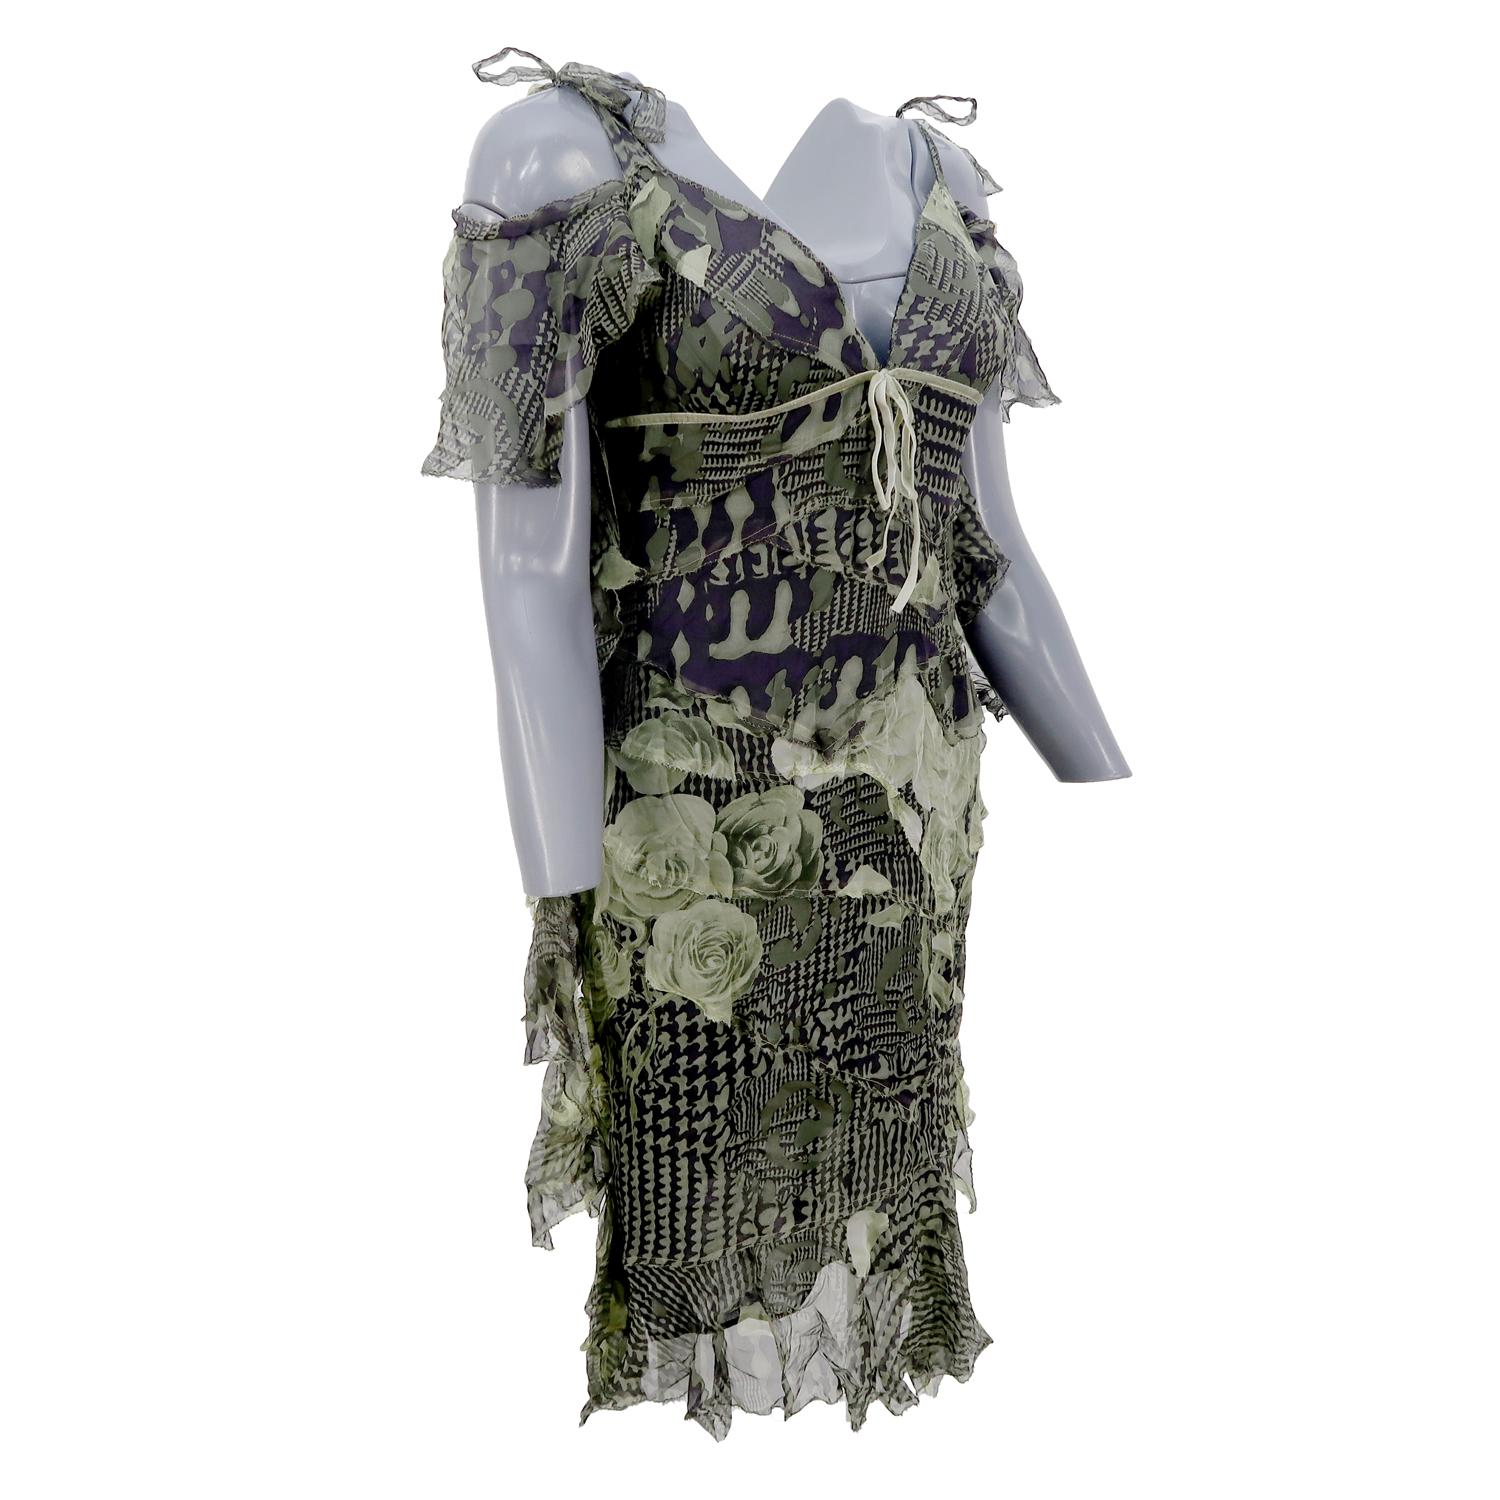 Despite being born in the UK, Antonio Berardi’s roots are Sicilian ones, explaining his love of drama and femininity. This gorgeous silk dress, which mixes a variety of prints and motifs, fuses military tones with romantic roses and graphic